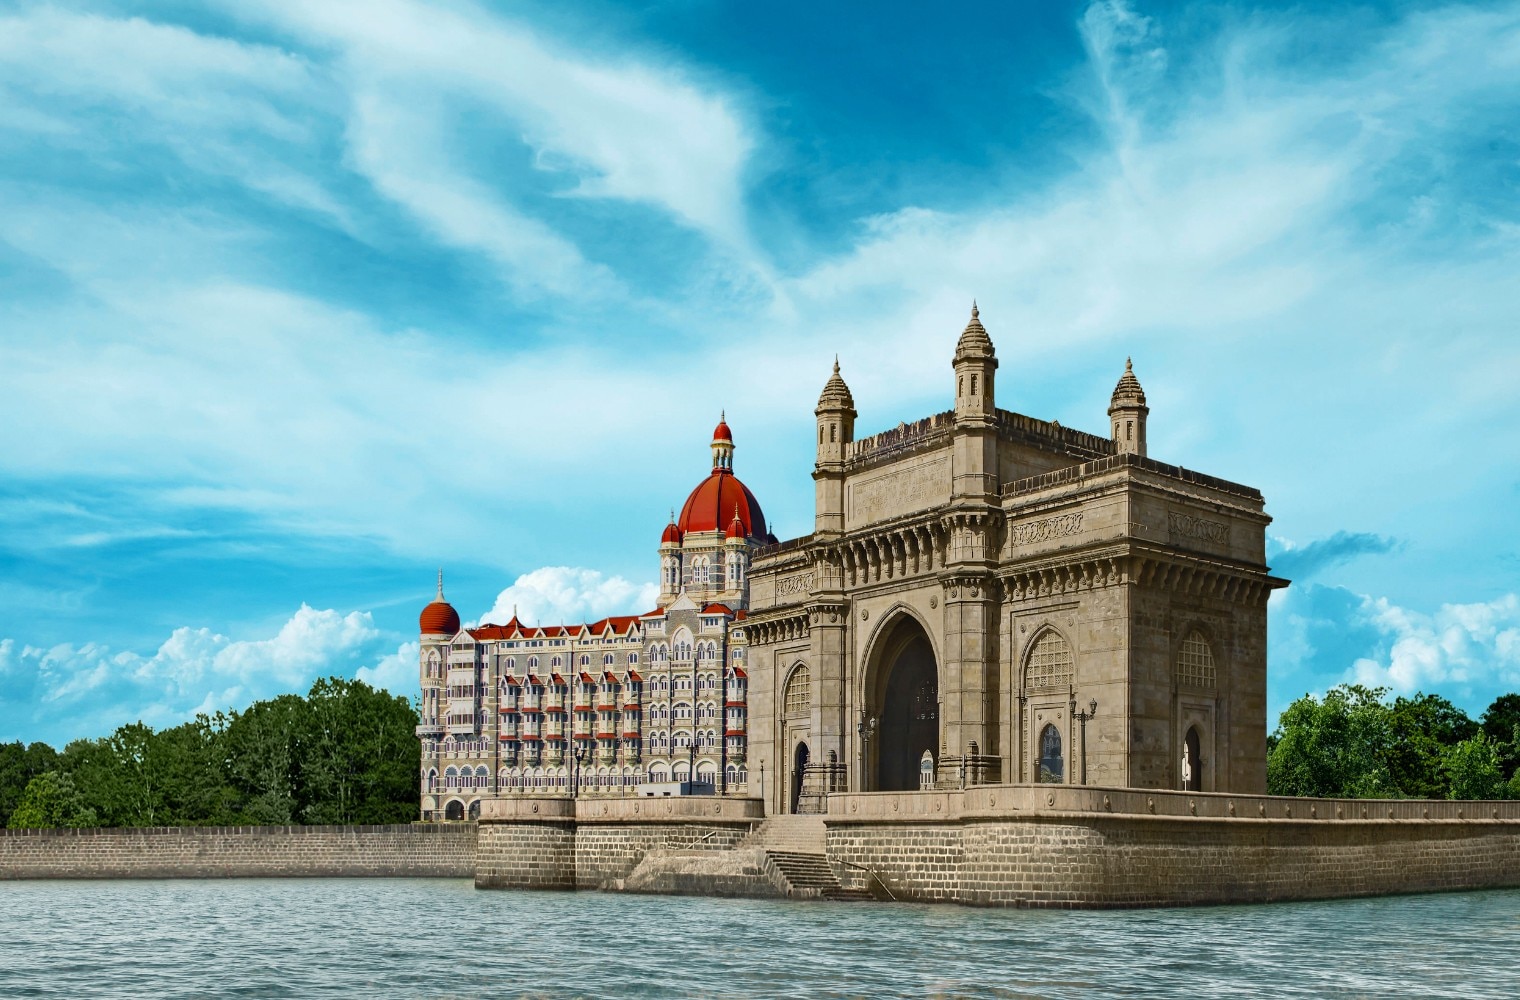 A picture of the Gateway of India in Mumbai, India